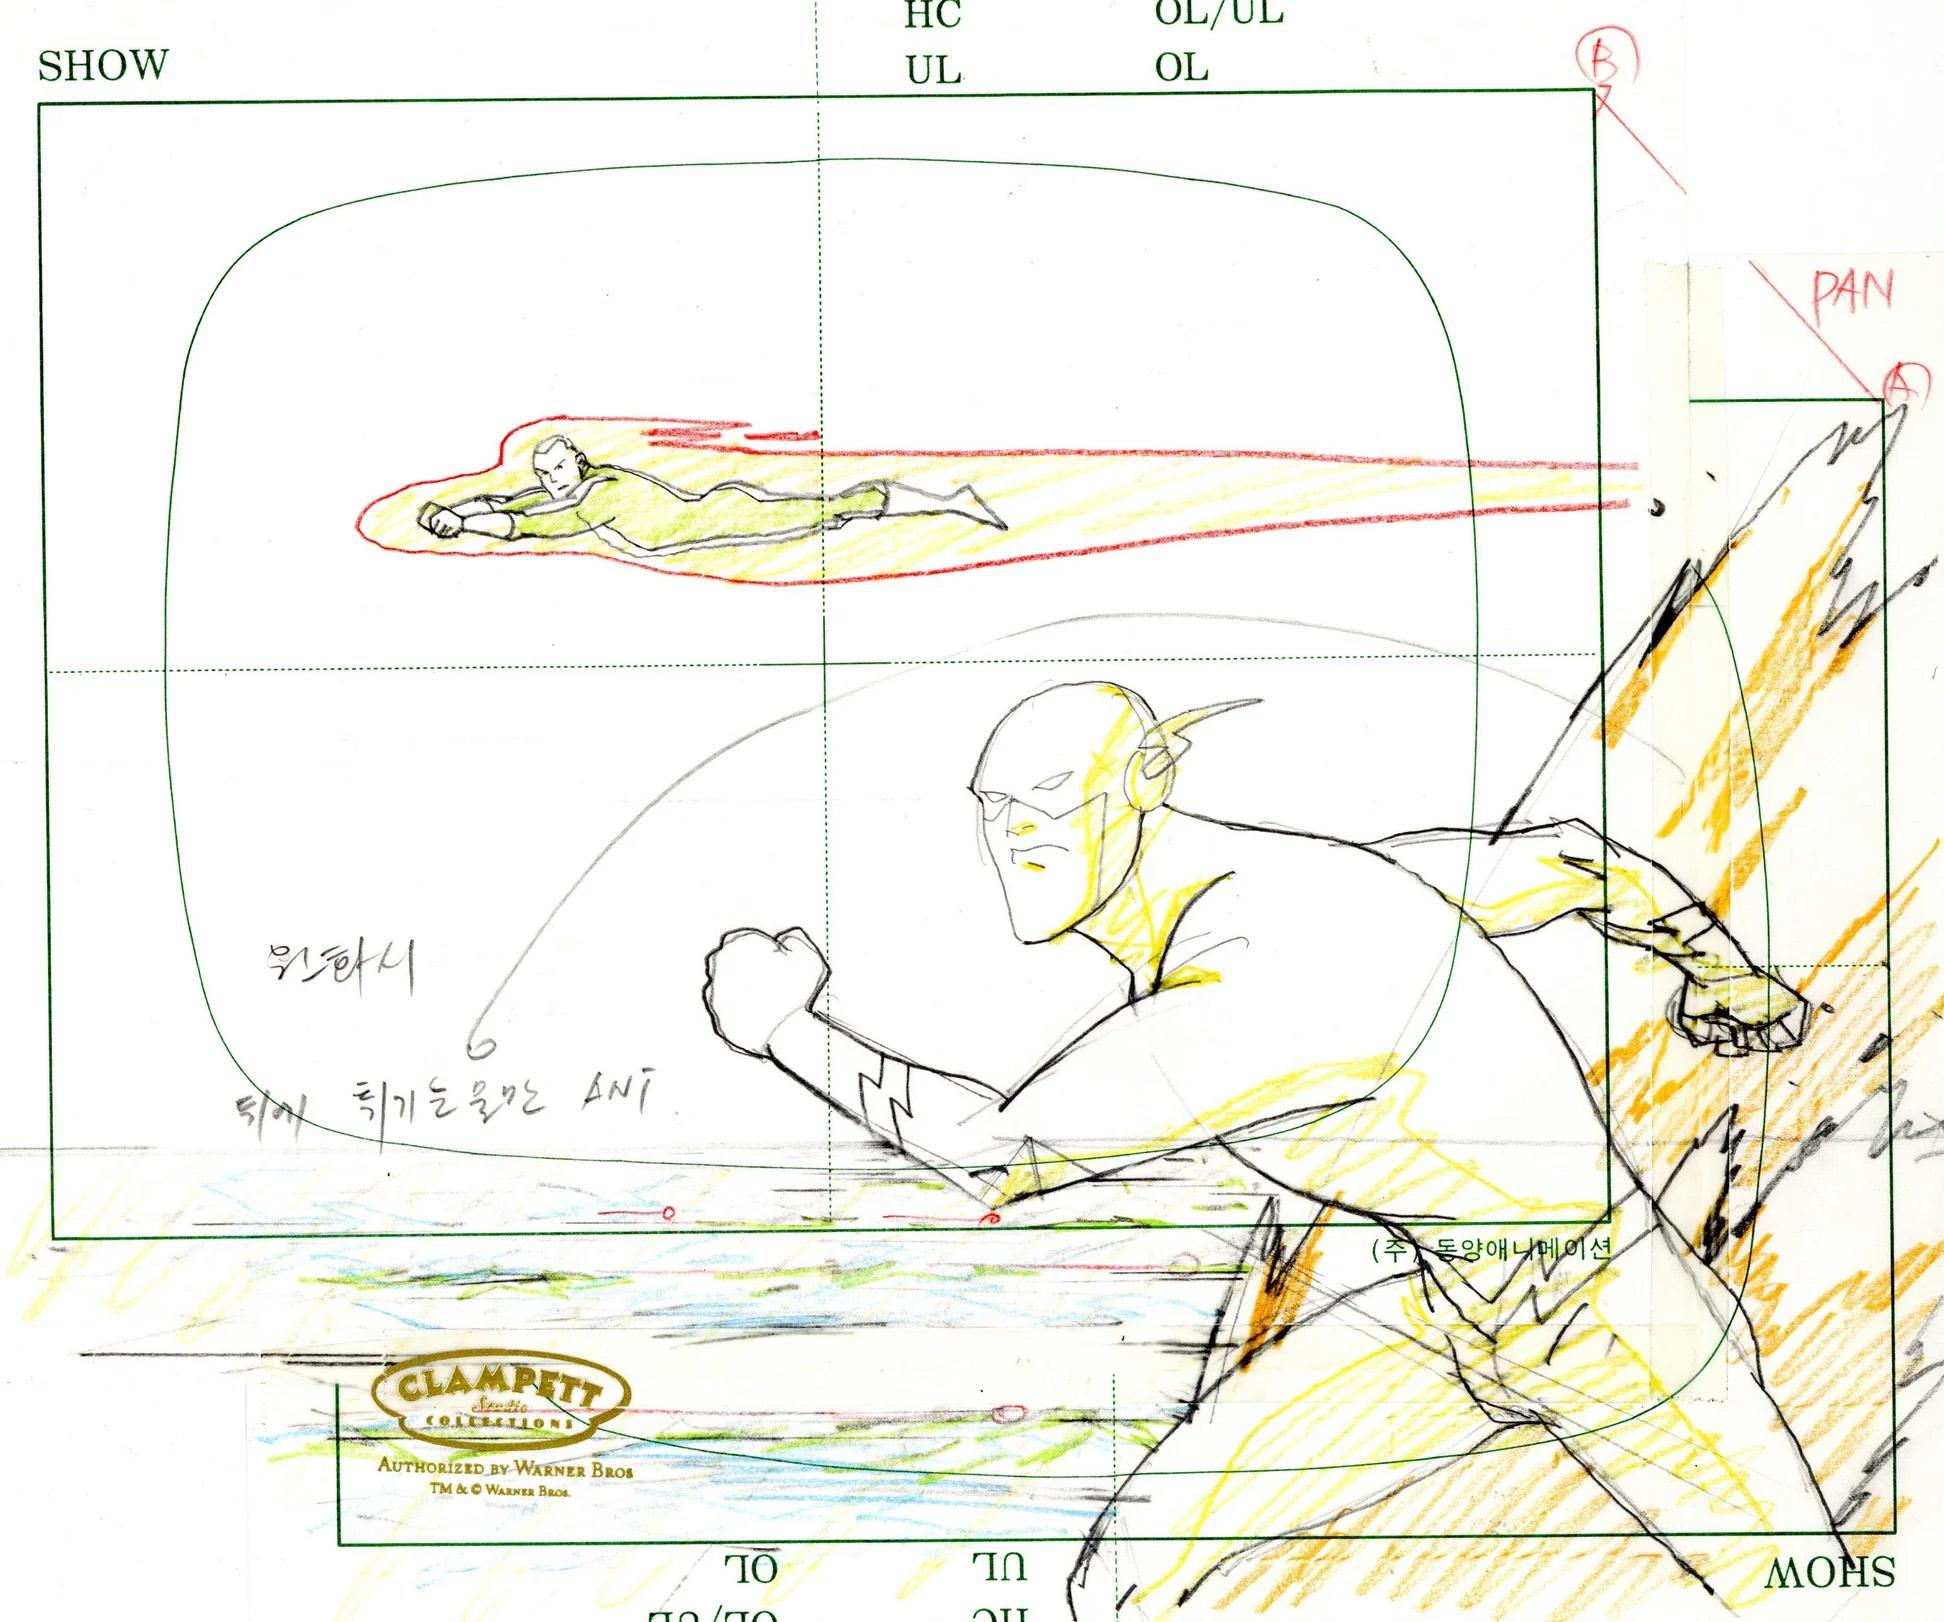 Justice League Original Production Layout Drawing: The Flash, Green Lantern - Art by Warner Bros. Studio Artists